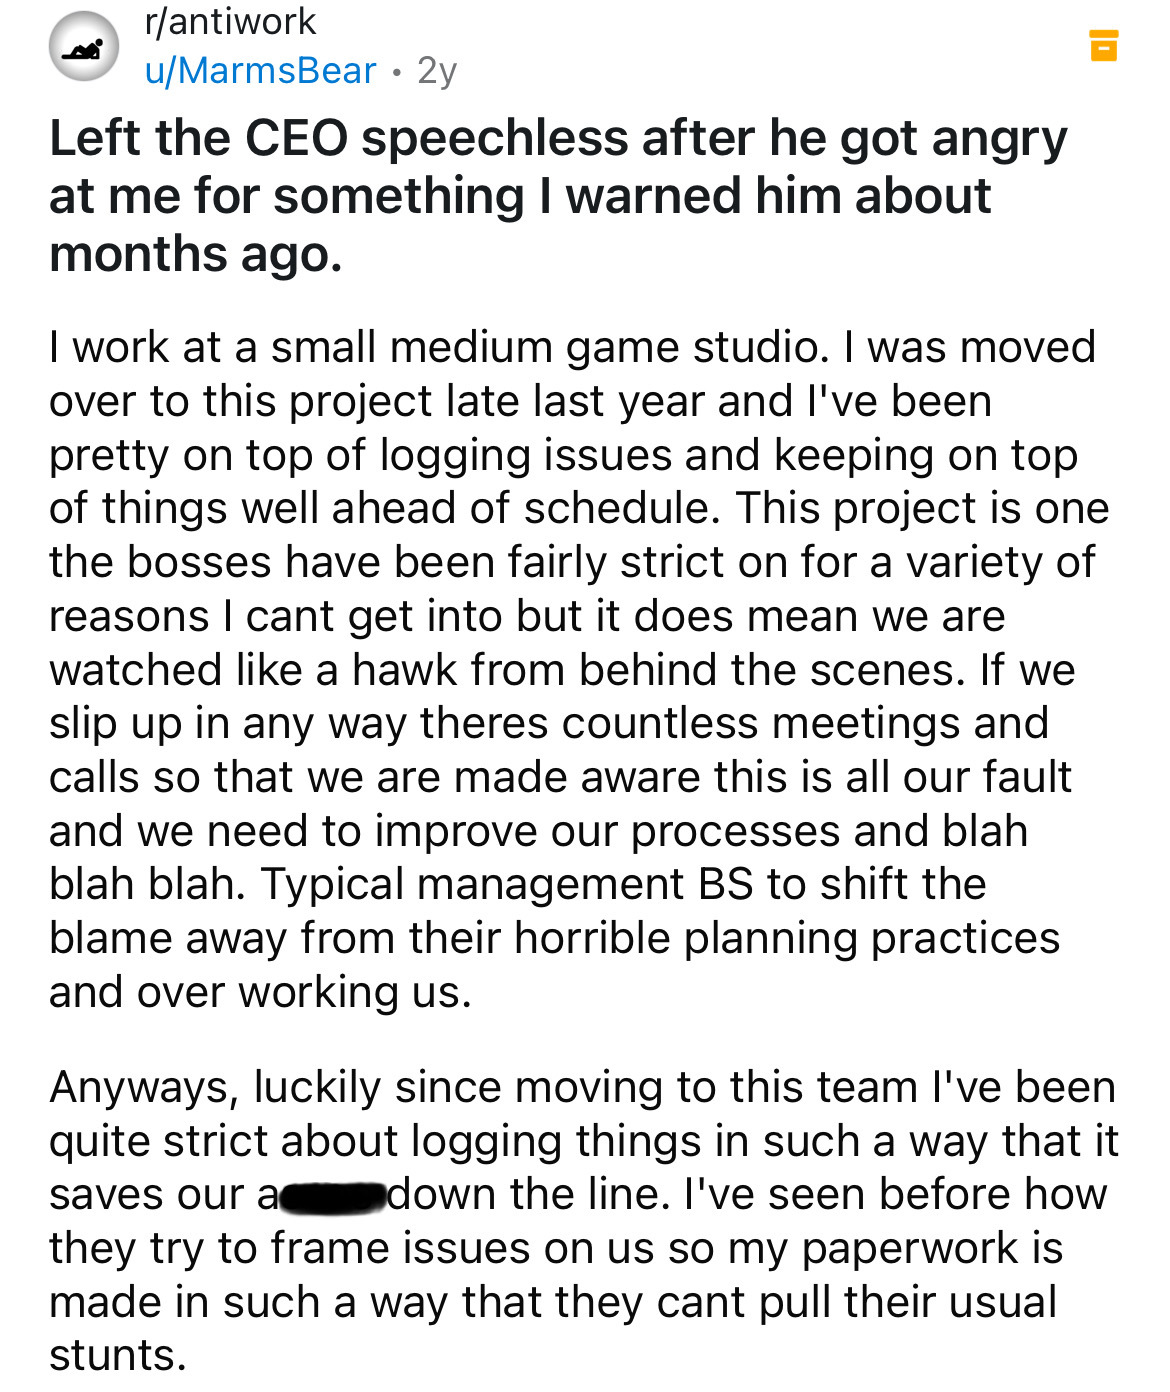 document - rantiwork uMarmsBear. 2y Left the Ceo speechless after he got angry at me for something I warned him about months ago. I work at a small medium game studio. I was moved over to this project late last year and I've been pretty on top of logging 